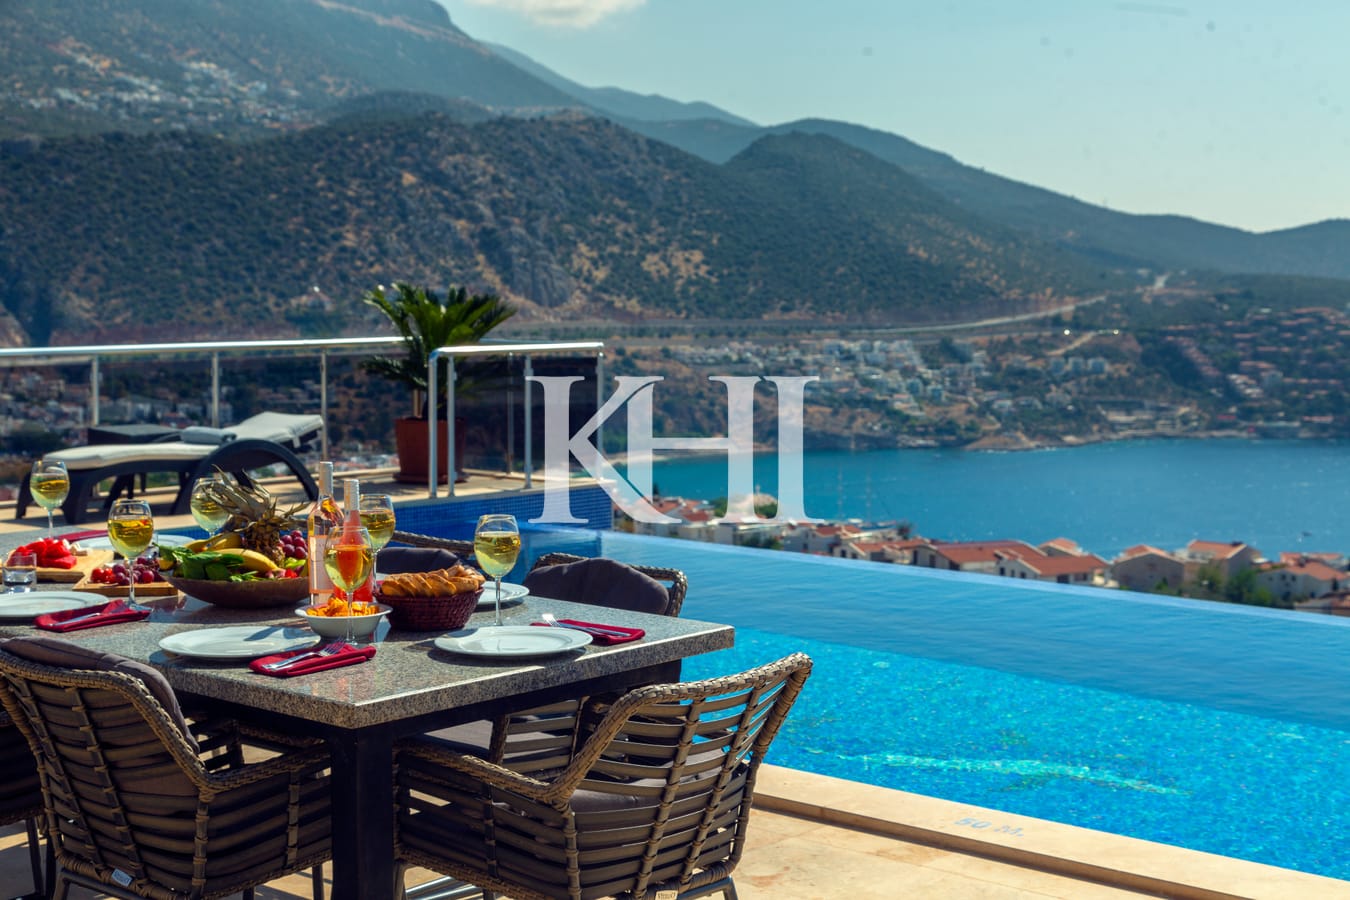 Detached Villa For Sale With Panoramic Kalkan View Slide Image 7